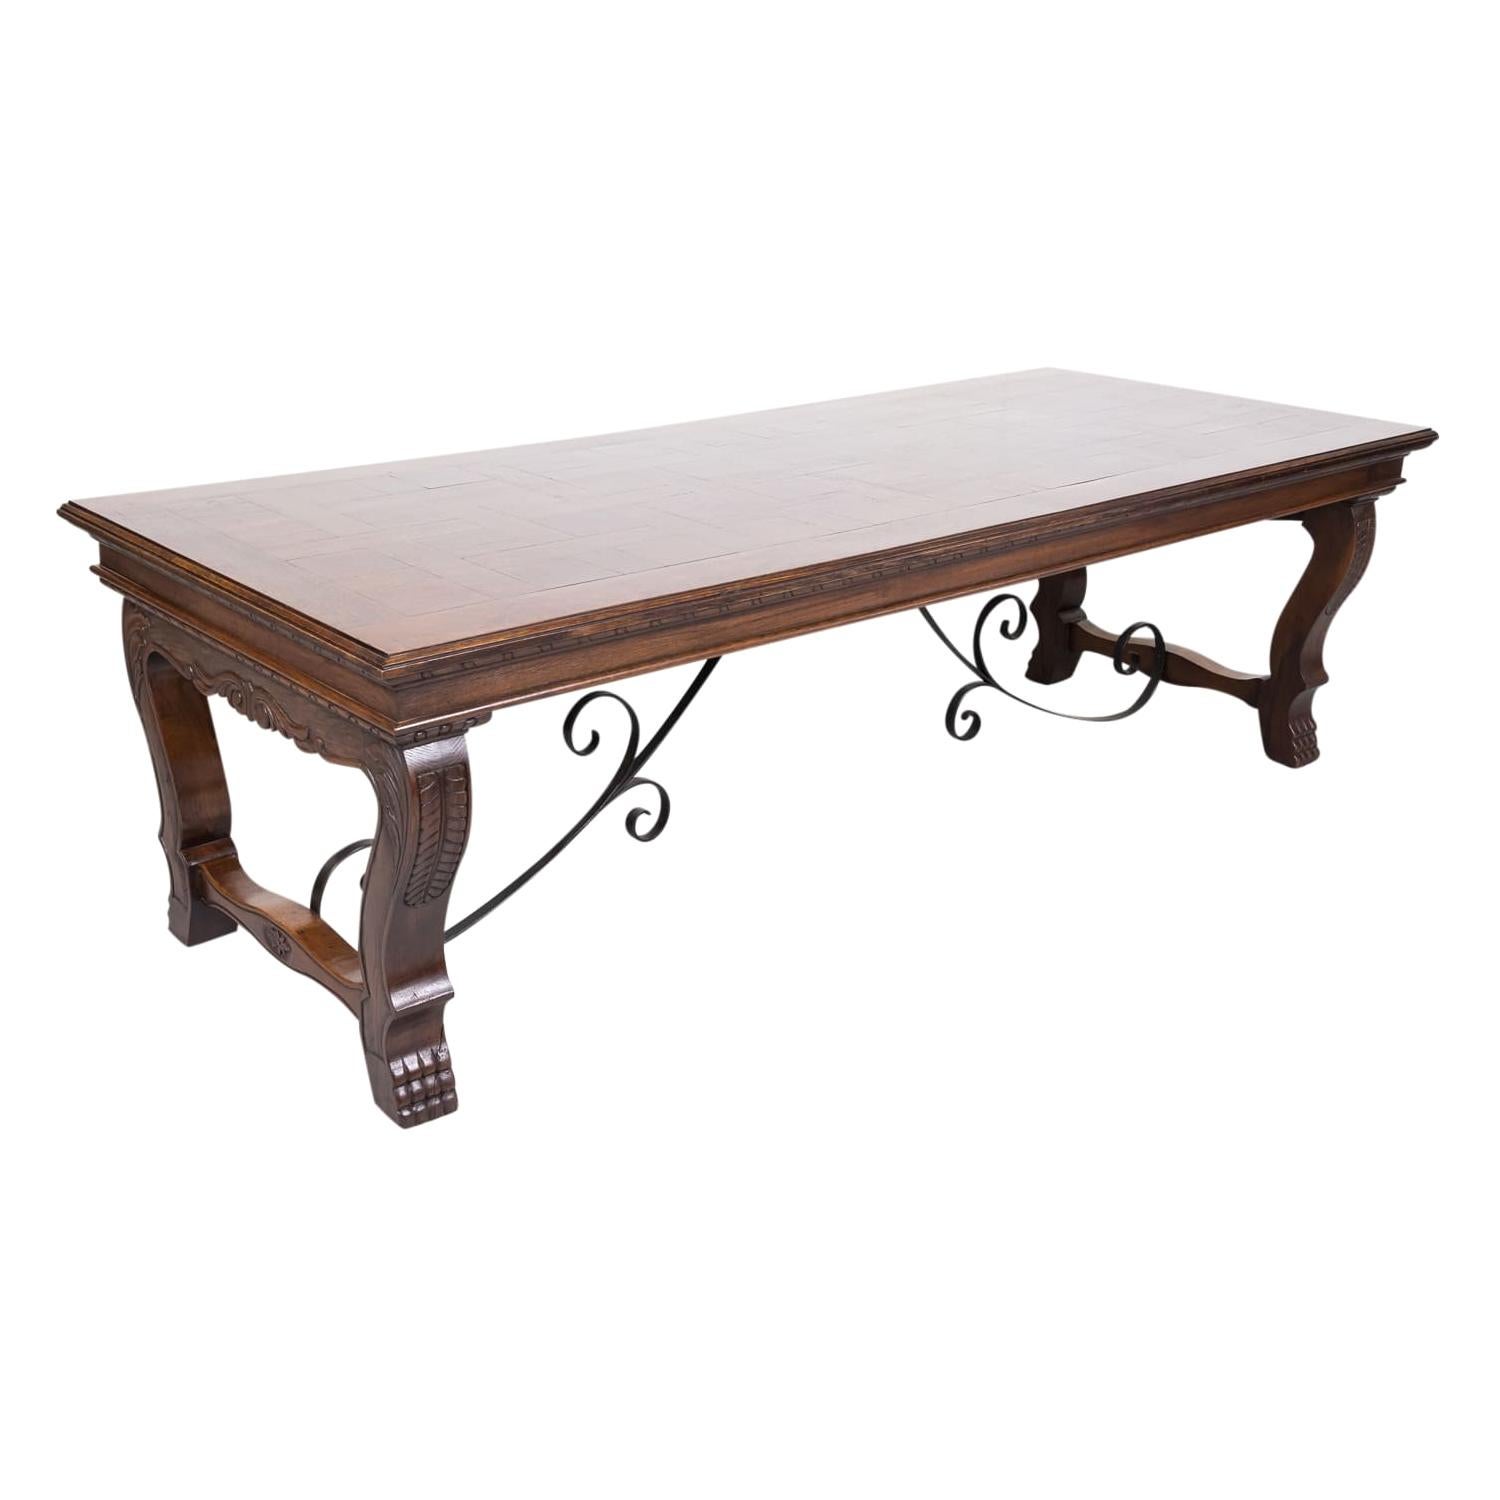 Antique French Carved Renaissance Style Dining Table For Sale